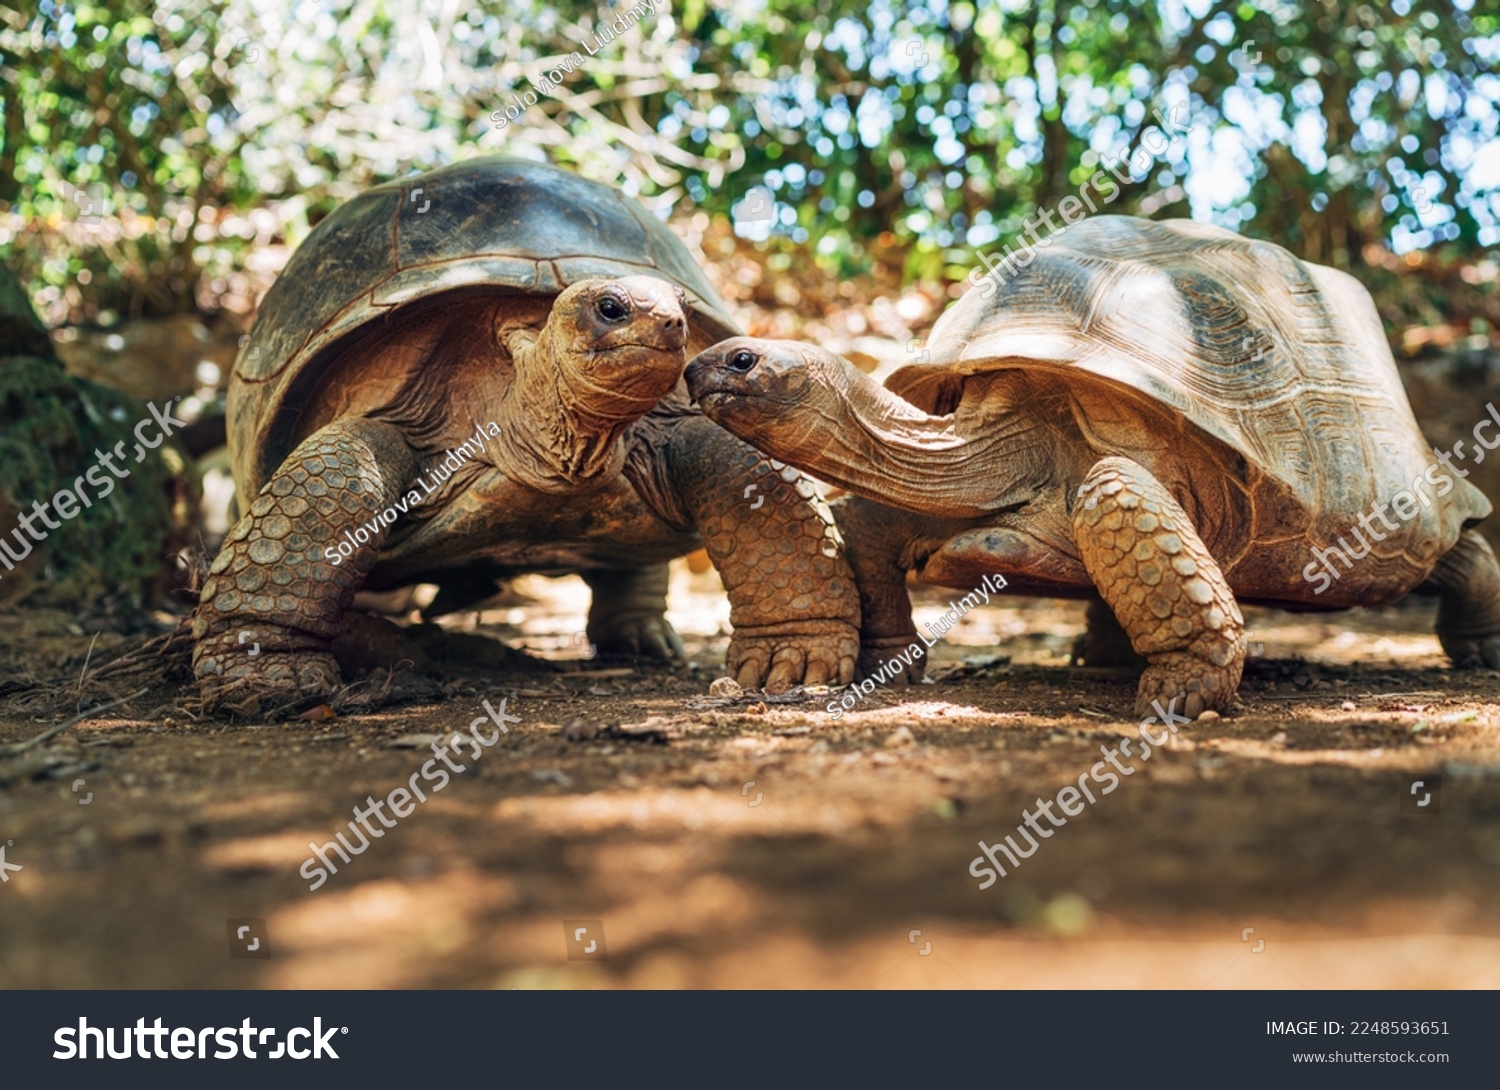 Couple of Aldabra giant tortoises endemic species - one of the largest tortoises in the world in zoo Nature park on Mauritius island. Huge reptiles portrait. Exotic animals, love and traveling concept #2248593651